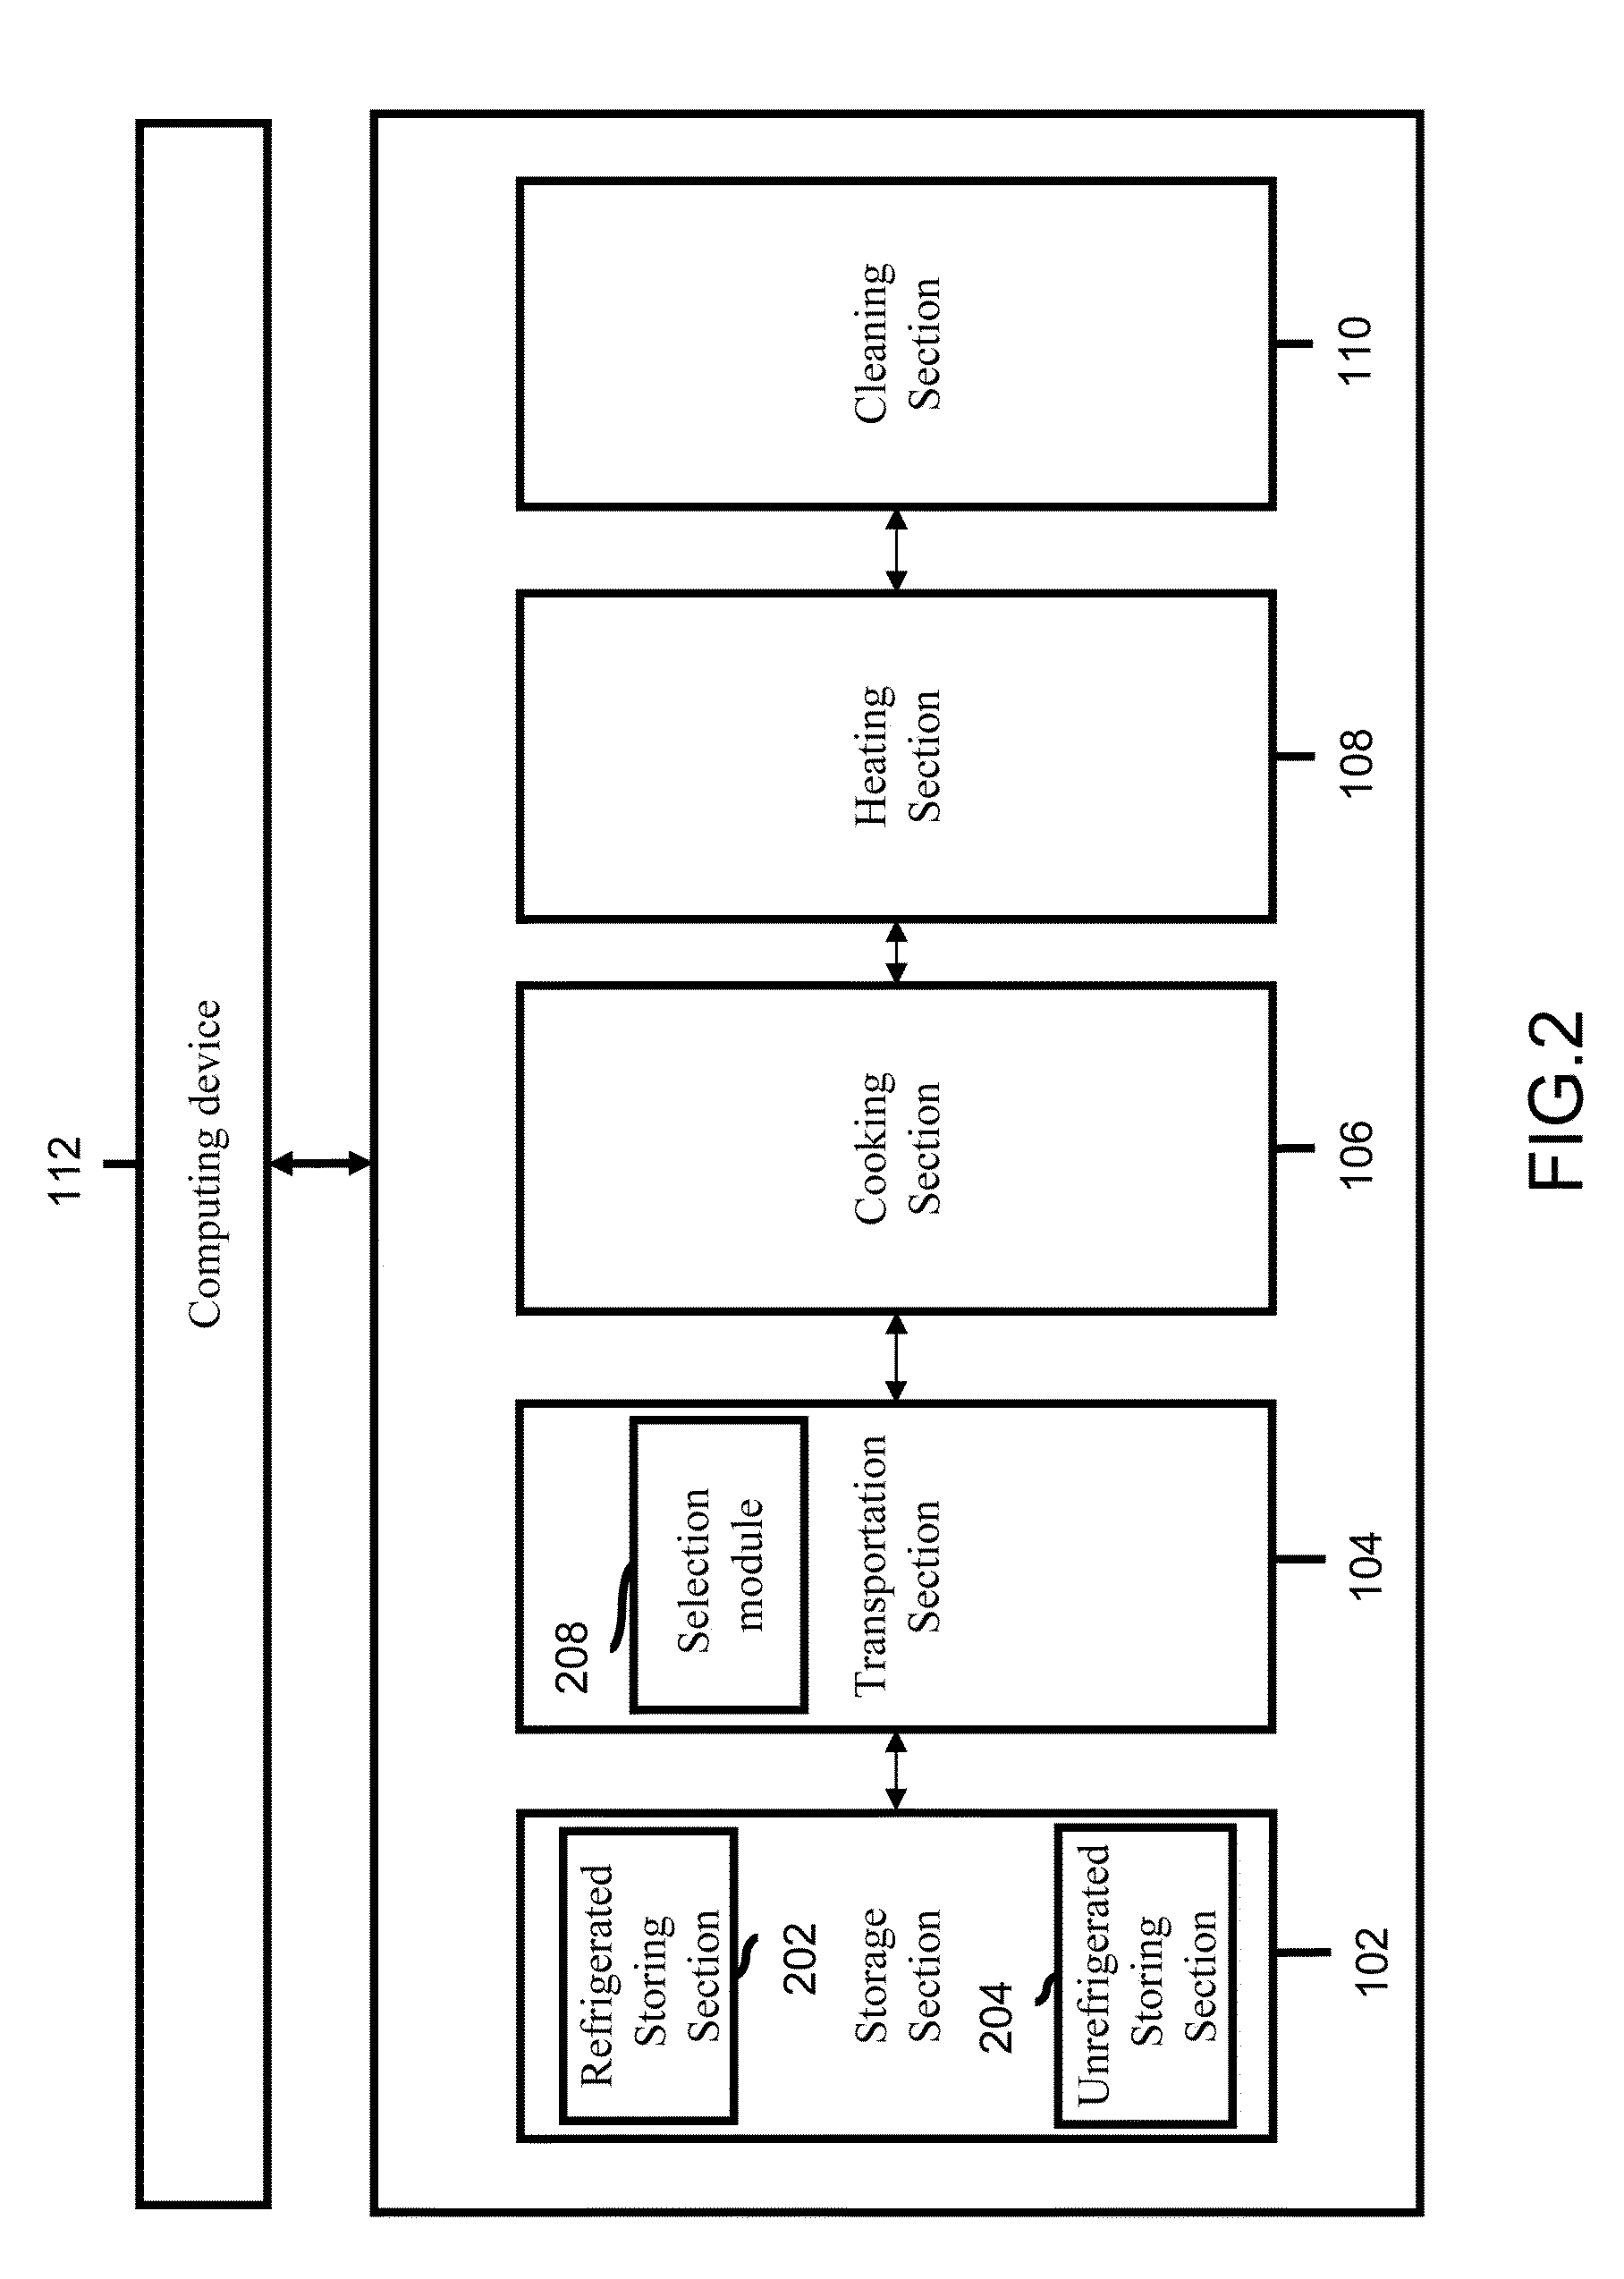 Method and System for Food Preparation